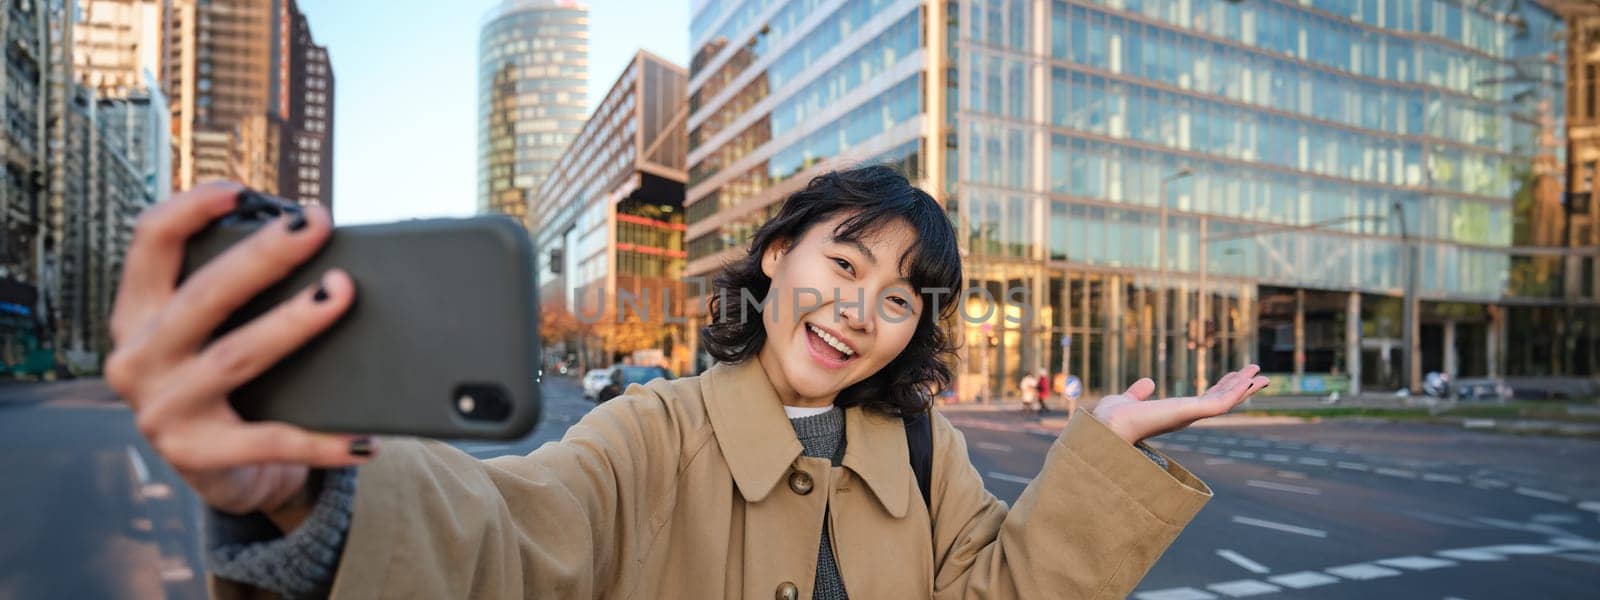 Upbeat asian girl takes selfie with smartphone in city centre, showing something behind her with smiling face. Tourist goes sightseeing.